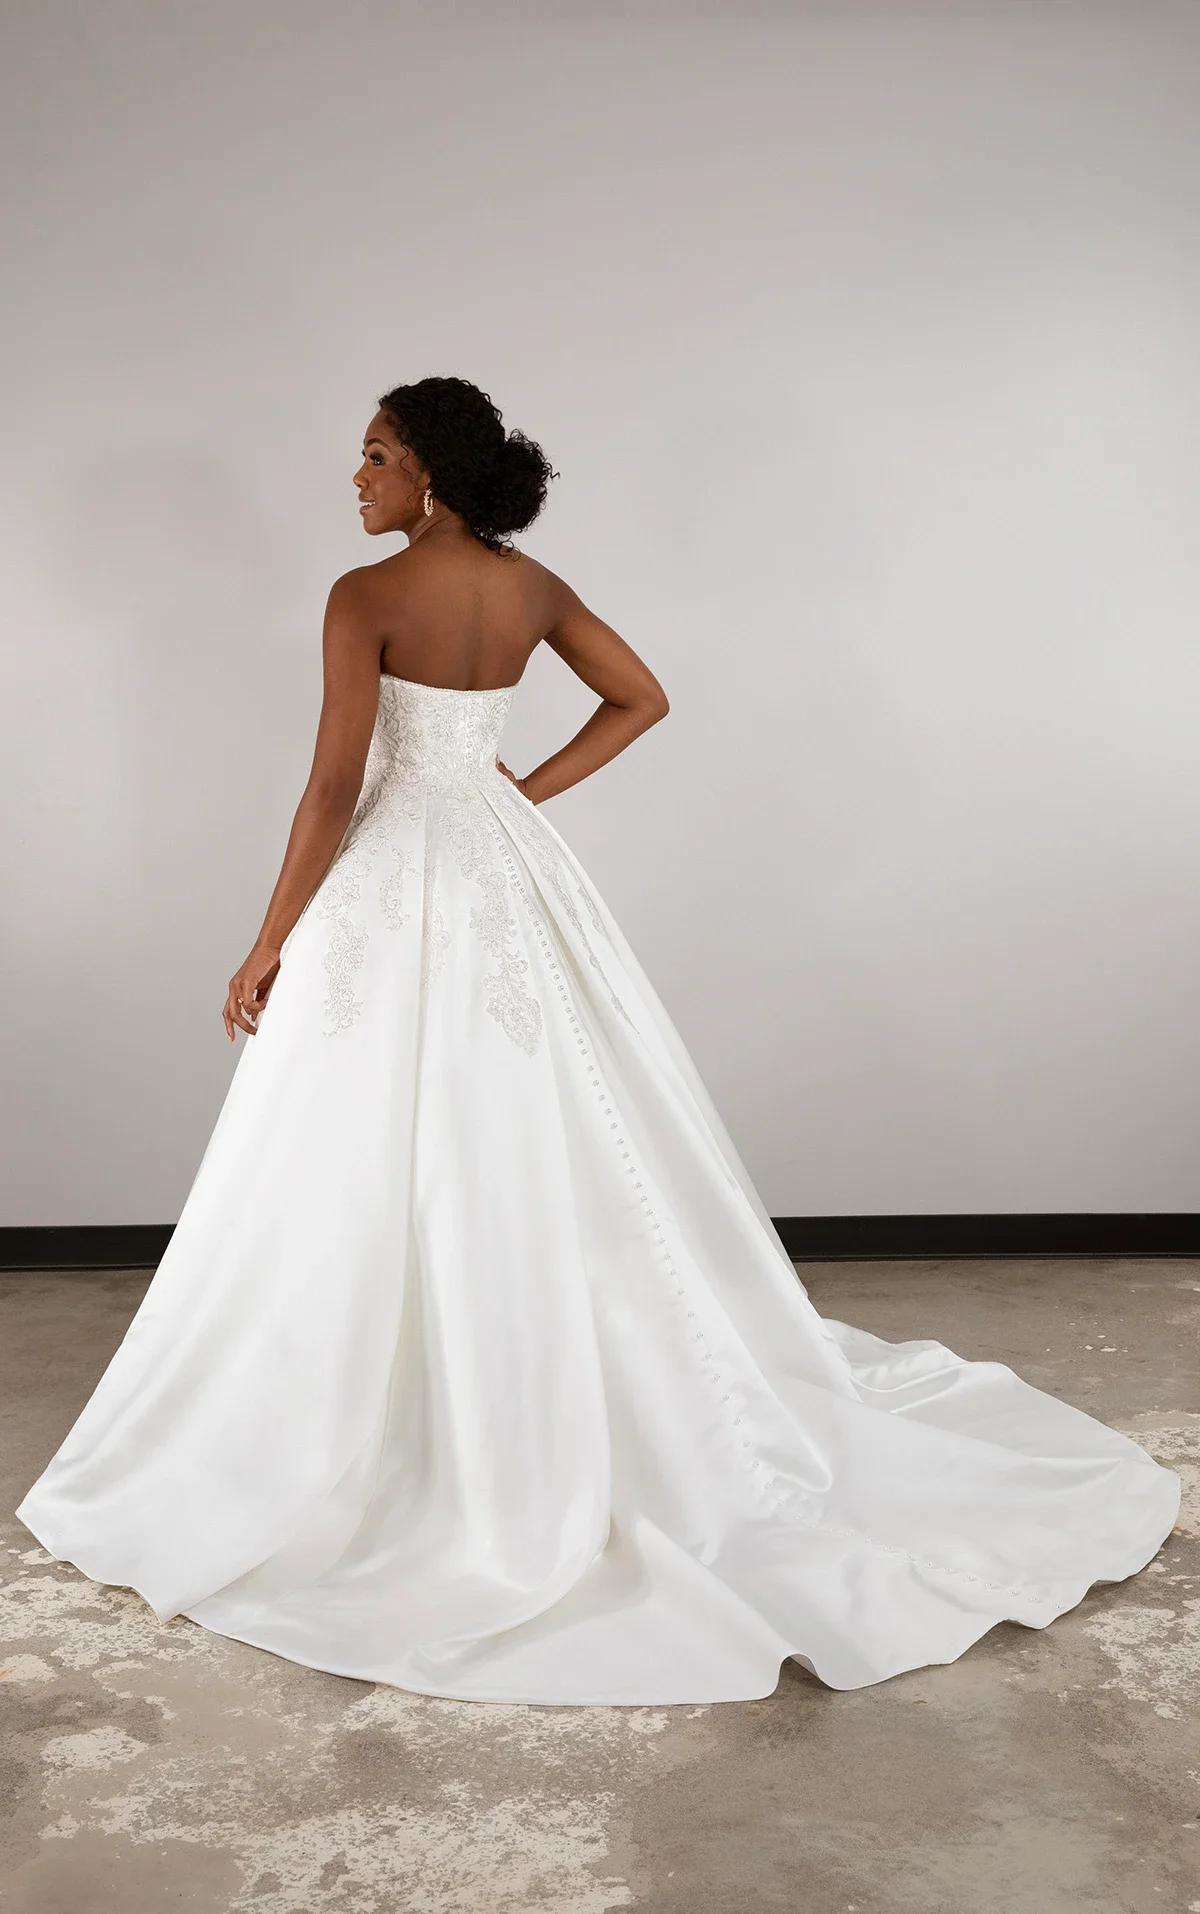 Regal Strapless Ball Gown by Essense of Australia - Image 2